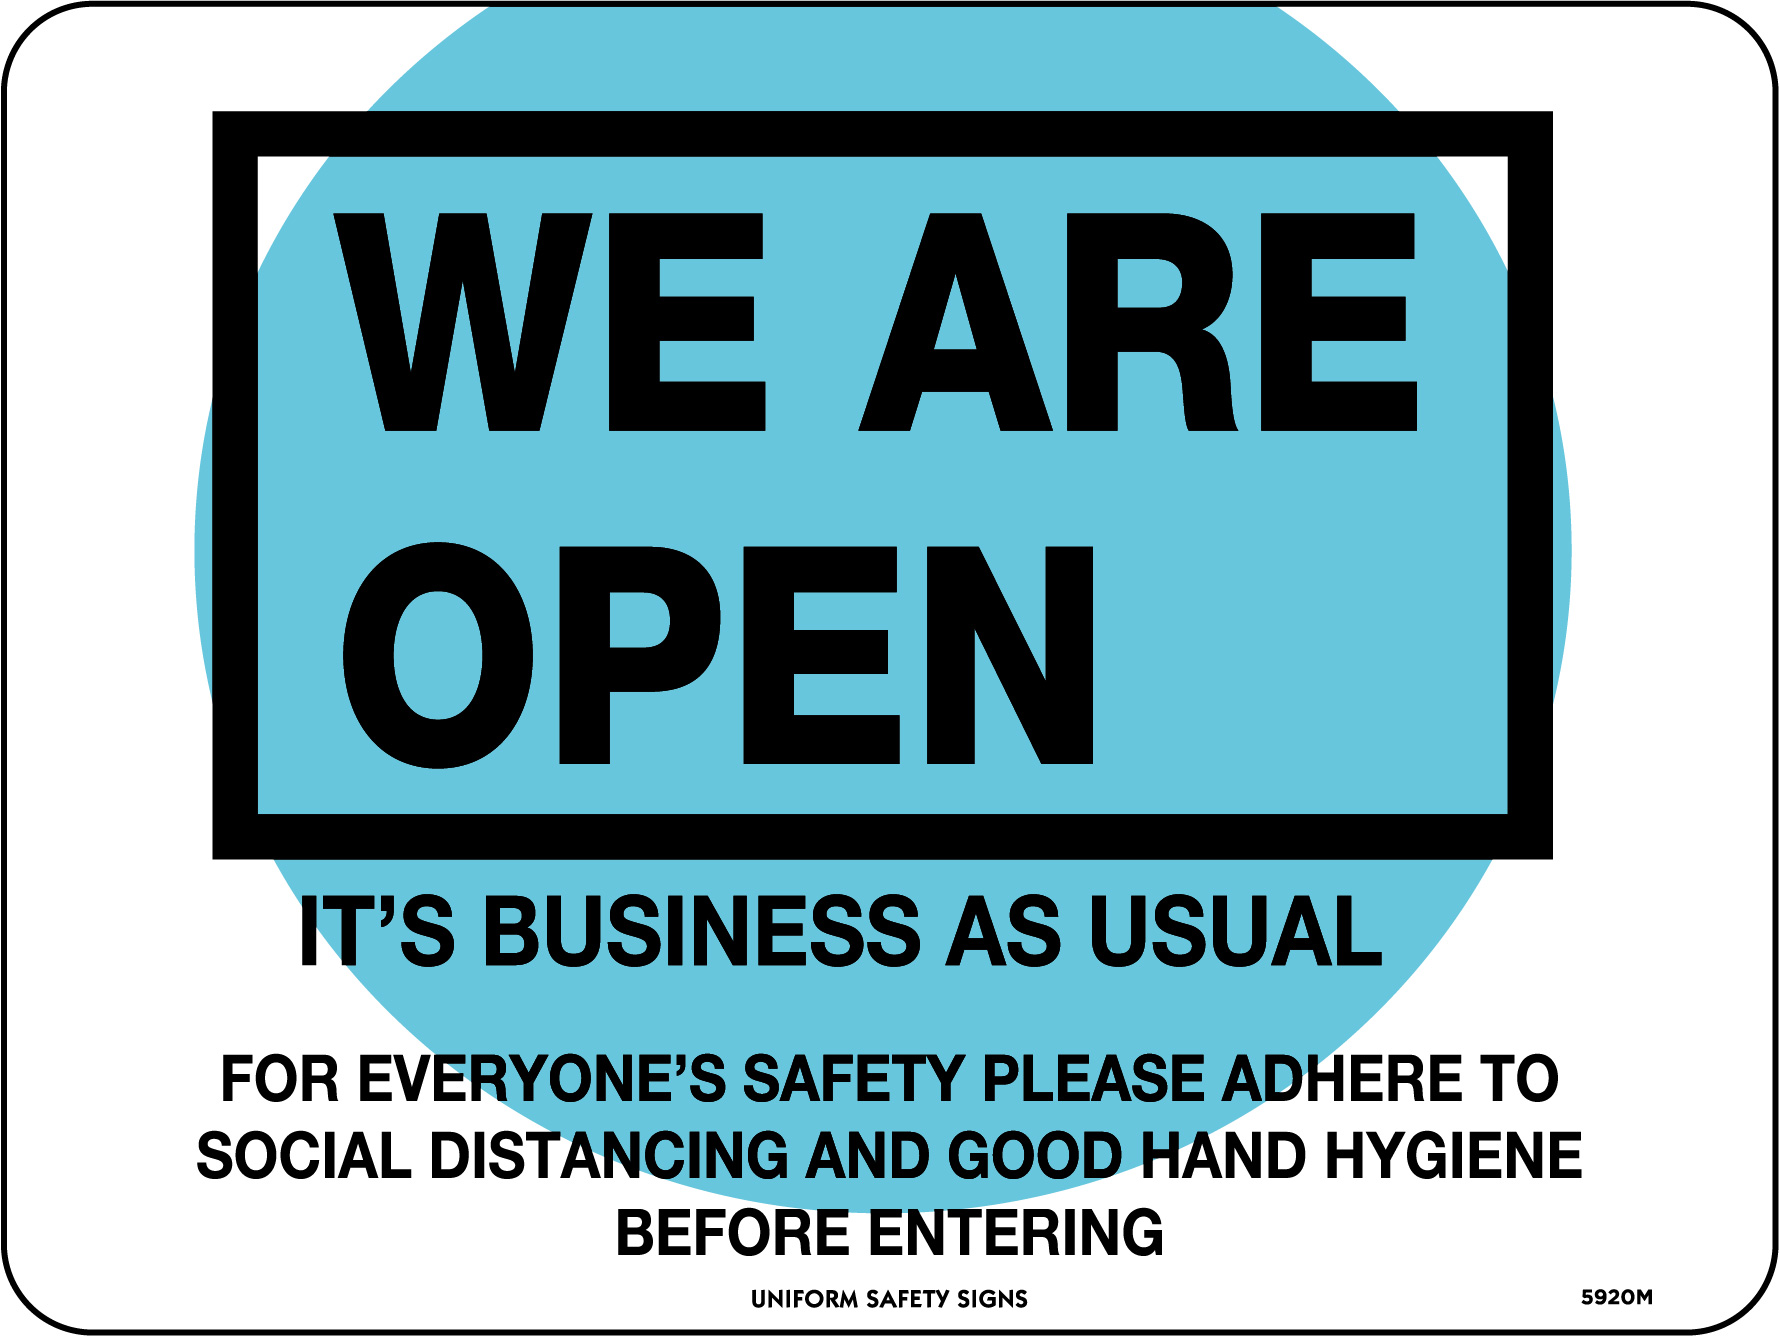 SIGN 300X225MM - 300X225MM - POLY - WE ARE OPEN BUSINESS AS USUAL